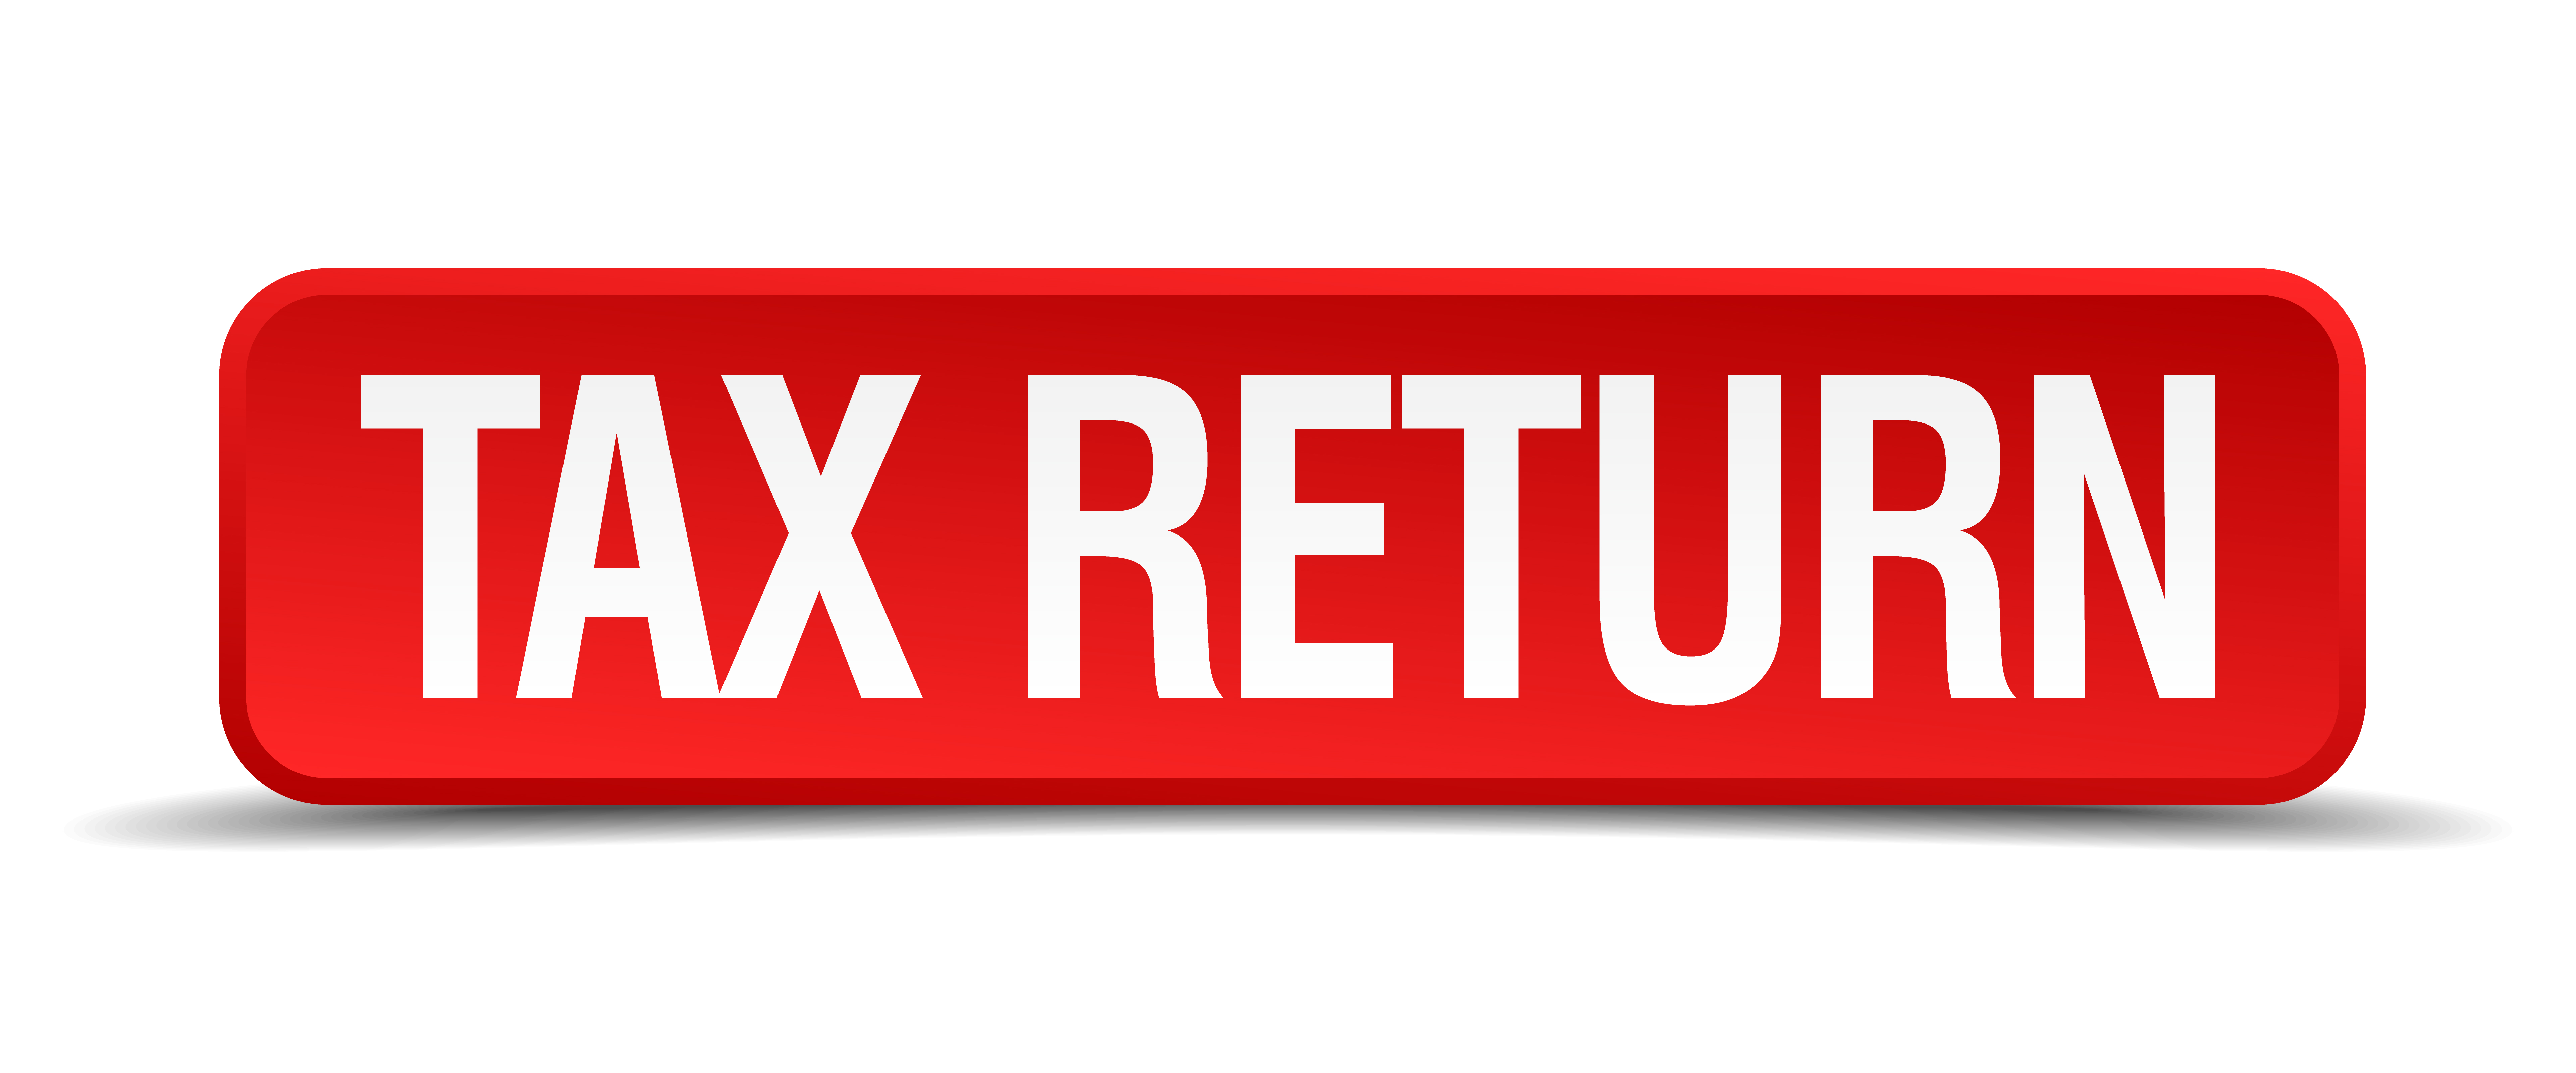 What We Think Are The 5 Best Uses For Your Tax Return! New Dimensions